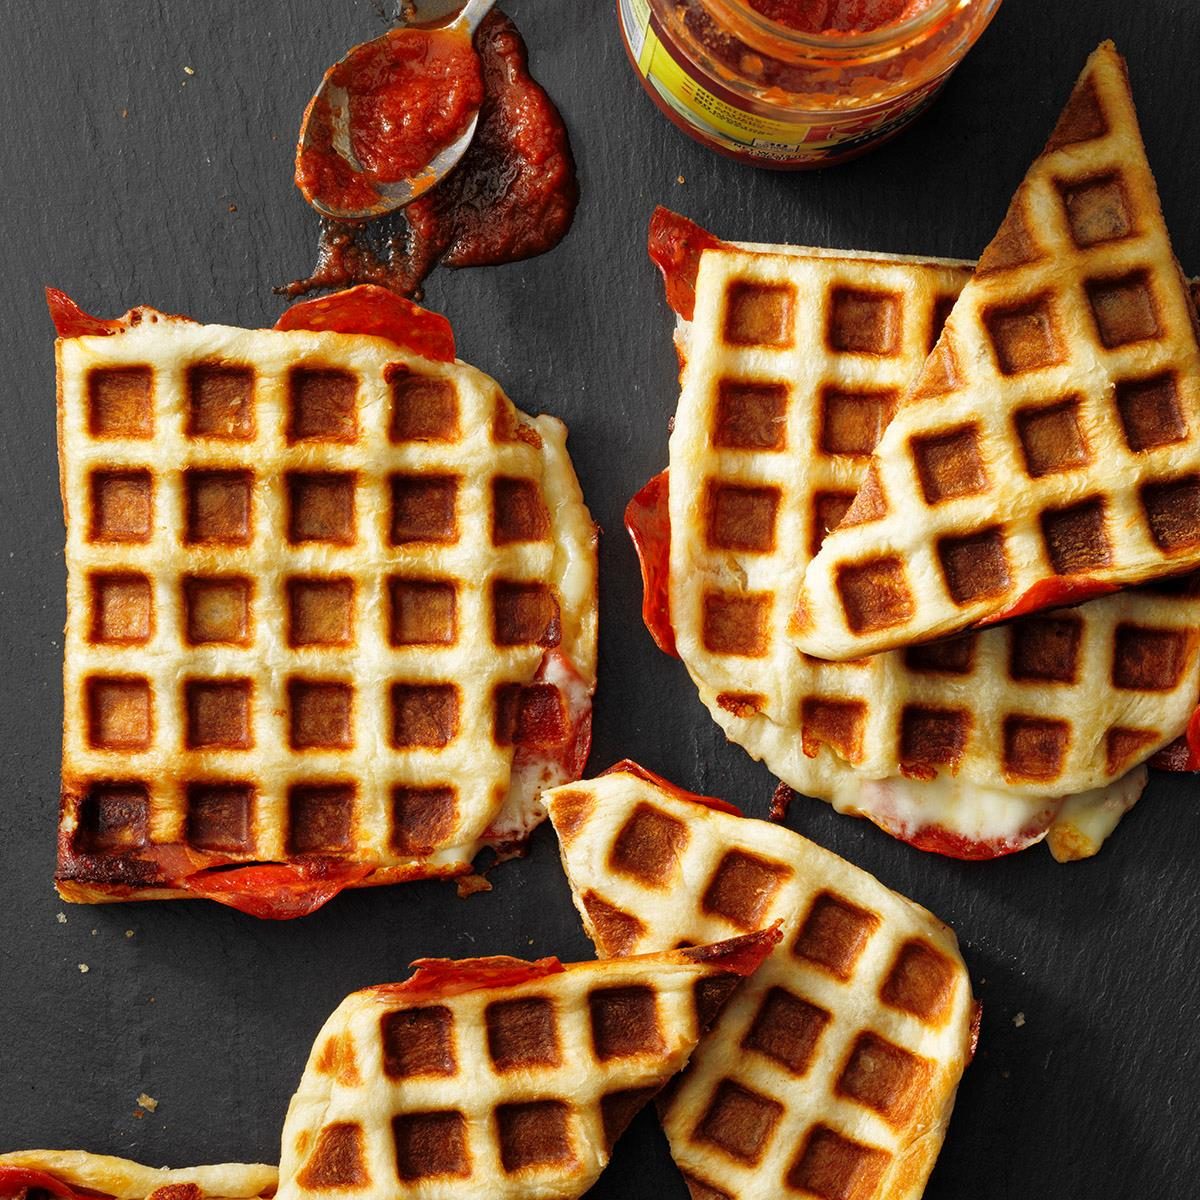 Best Waffle Iron Grilled Cheese Recipe - How To Make Waffle Iron Grilled  Cheese